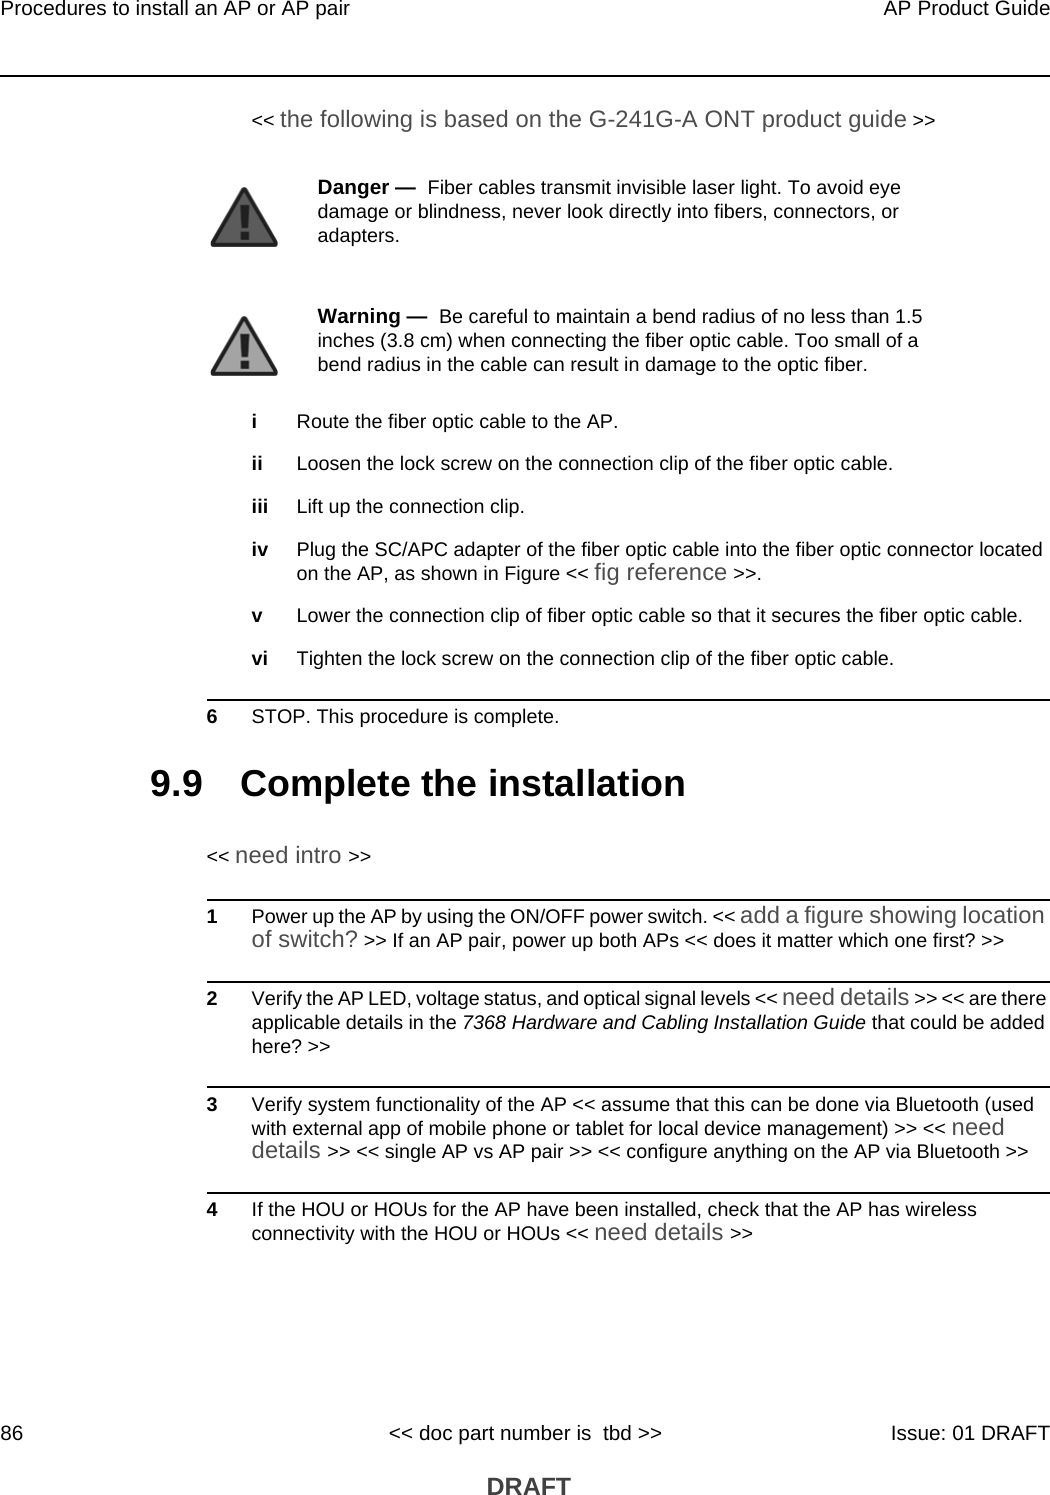 Procedures to install an AP or AP pair86AP Product Guide&lt;&lt; doc part number is  tbd &gt;&gt; Issue: 01 DRAFT DRAFT&lt;&lt; the following is based on the G-241G-A ONT product guide &gt;&gt;iRoute the fiber optic cable to the AP.ii Loosen the lock screw on the connection clip of the fiber optic cable.iii Lift up the connection clip.iv Plug the SC/APC adapter of the fiber optic cable into the fiber optic connector located on the AP, as shown in Figure &lt;&lt; fig reference &gt;&gt;.vLower the connection clip of fiber optic cable so that it secures the fiber optic cable. vi Tighten the lock screw on the connection clip of the fiber optic cable.6STOP. This procedure is complete.9.9 Complete the installation&lt;&lt; need intro &gt;&gt;1Power up the AP by using the ON/OFF power switch. &lt;&lt; add a figure showing location of switch? &gt;&gt; If an AP pair, power up both APs &lt;&lt; does it matter which one first? &gt;&gt;2Verify the AP LED, voltage status, and optical signal levels &lt;&lt; need details &gt;&gt; &lt;&lt; are there applicable details in the 7368 Hardware and Cabling Installation Guide that could be added here? &gt;&gt;3Verify system functionality of the AP &lt;&lt; assume that this can be done via Bluetooth (used with external app of mobile phone or tablet for local device management) &gt;&gt; &lt;&lt; need details &gt;&gt; &lt;&lt; single AP vs AP pair &gt;&gt; &lt;&lt; configure anything on the AP via Bluetooth &gt;&gt;4If the HOU or HOUs for the AP have been installed, check that the AP has wireless connectivity with the HOU or HOUs &lt;&lt; need details &gt;&gt;Danger —  Fiber cables transmit invisible laser light. To avoid eye damage or blindness, never look directly into fibers, connectors, or adapters.Warning —  Be careful to maintain a bend radius of no less than 1.5 inches (3.8 cm) when connecting the fiber optic cable. Too small of a bend radius in the cable can result in damage to the optic fiber.